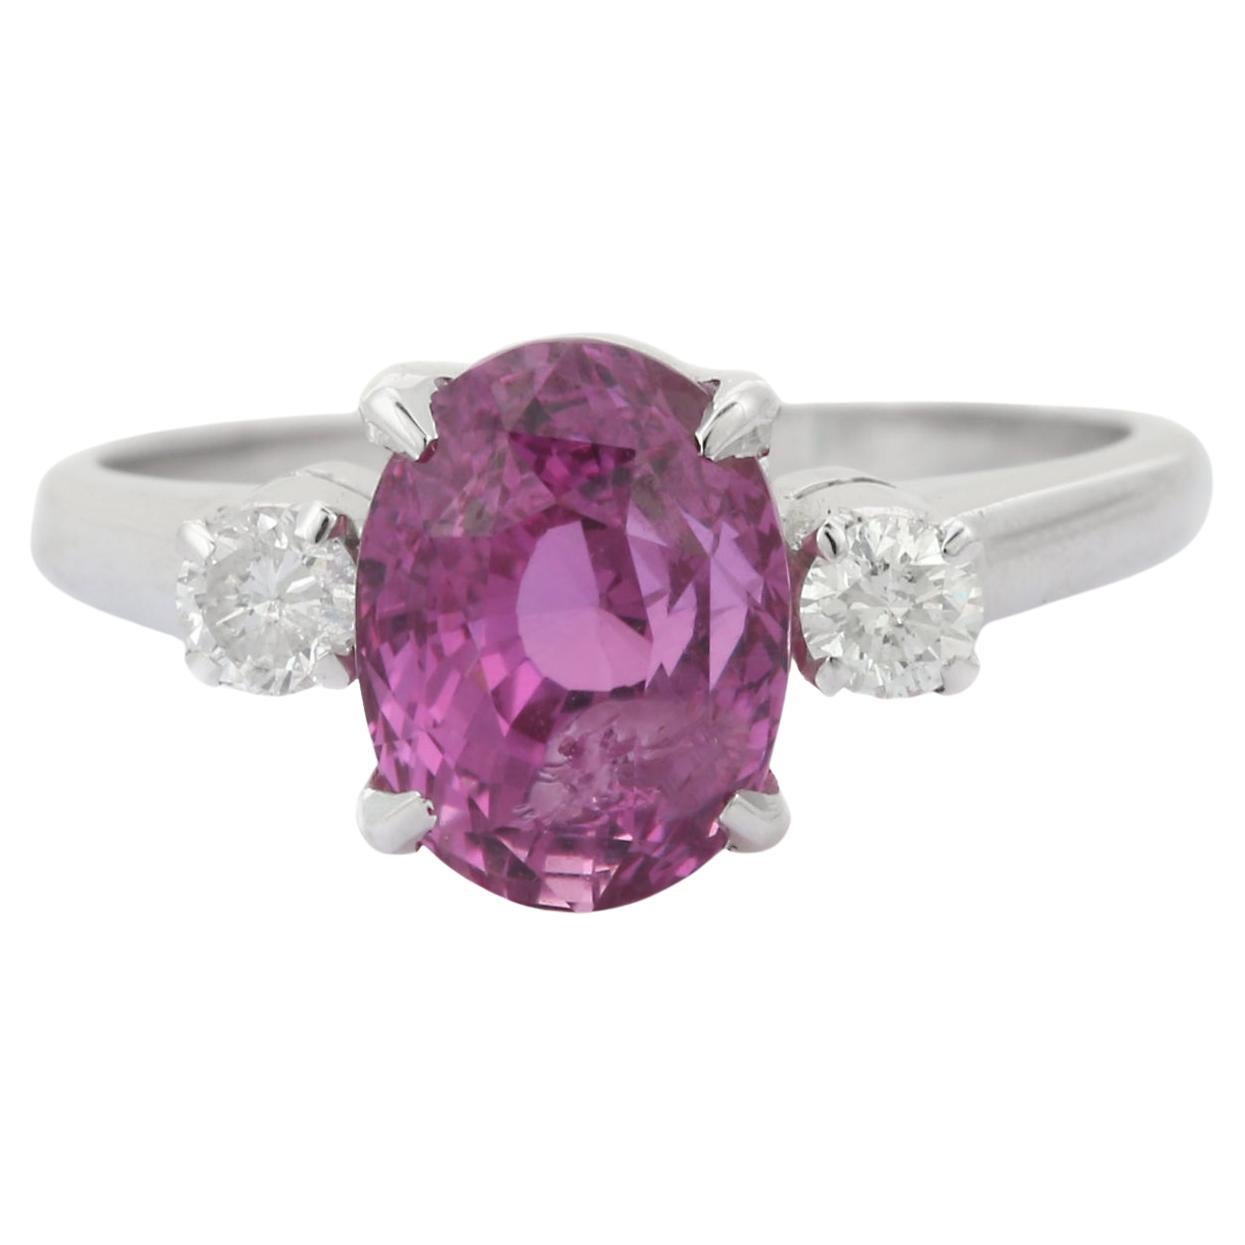 For Sale:  3.66 Carat Three Stone Pink Sapphire and Diamond Ring in 18K White Gold